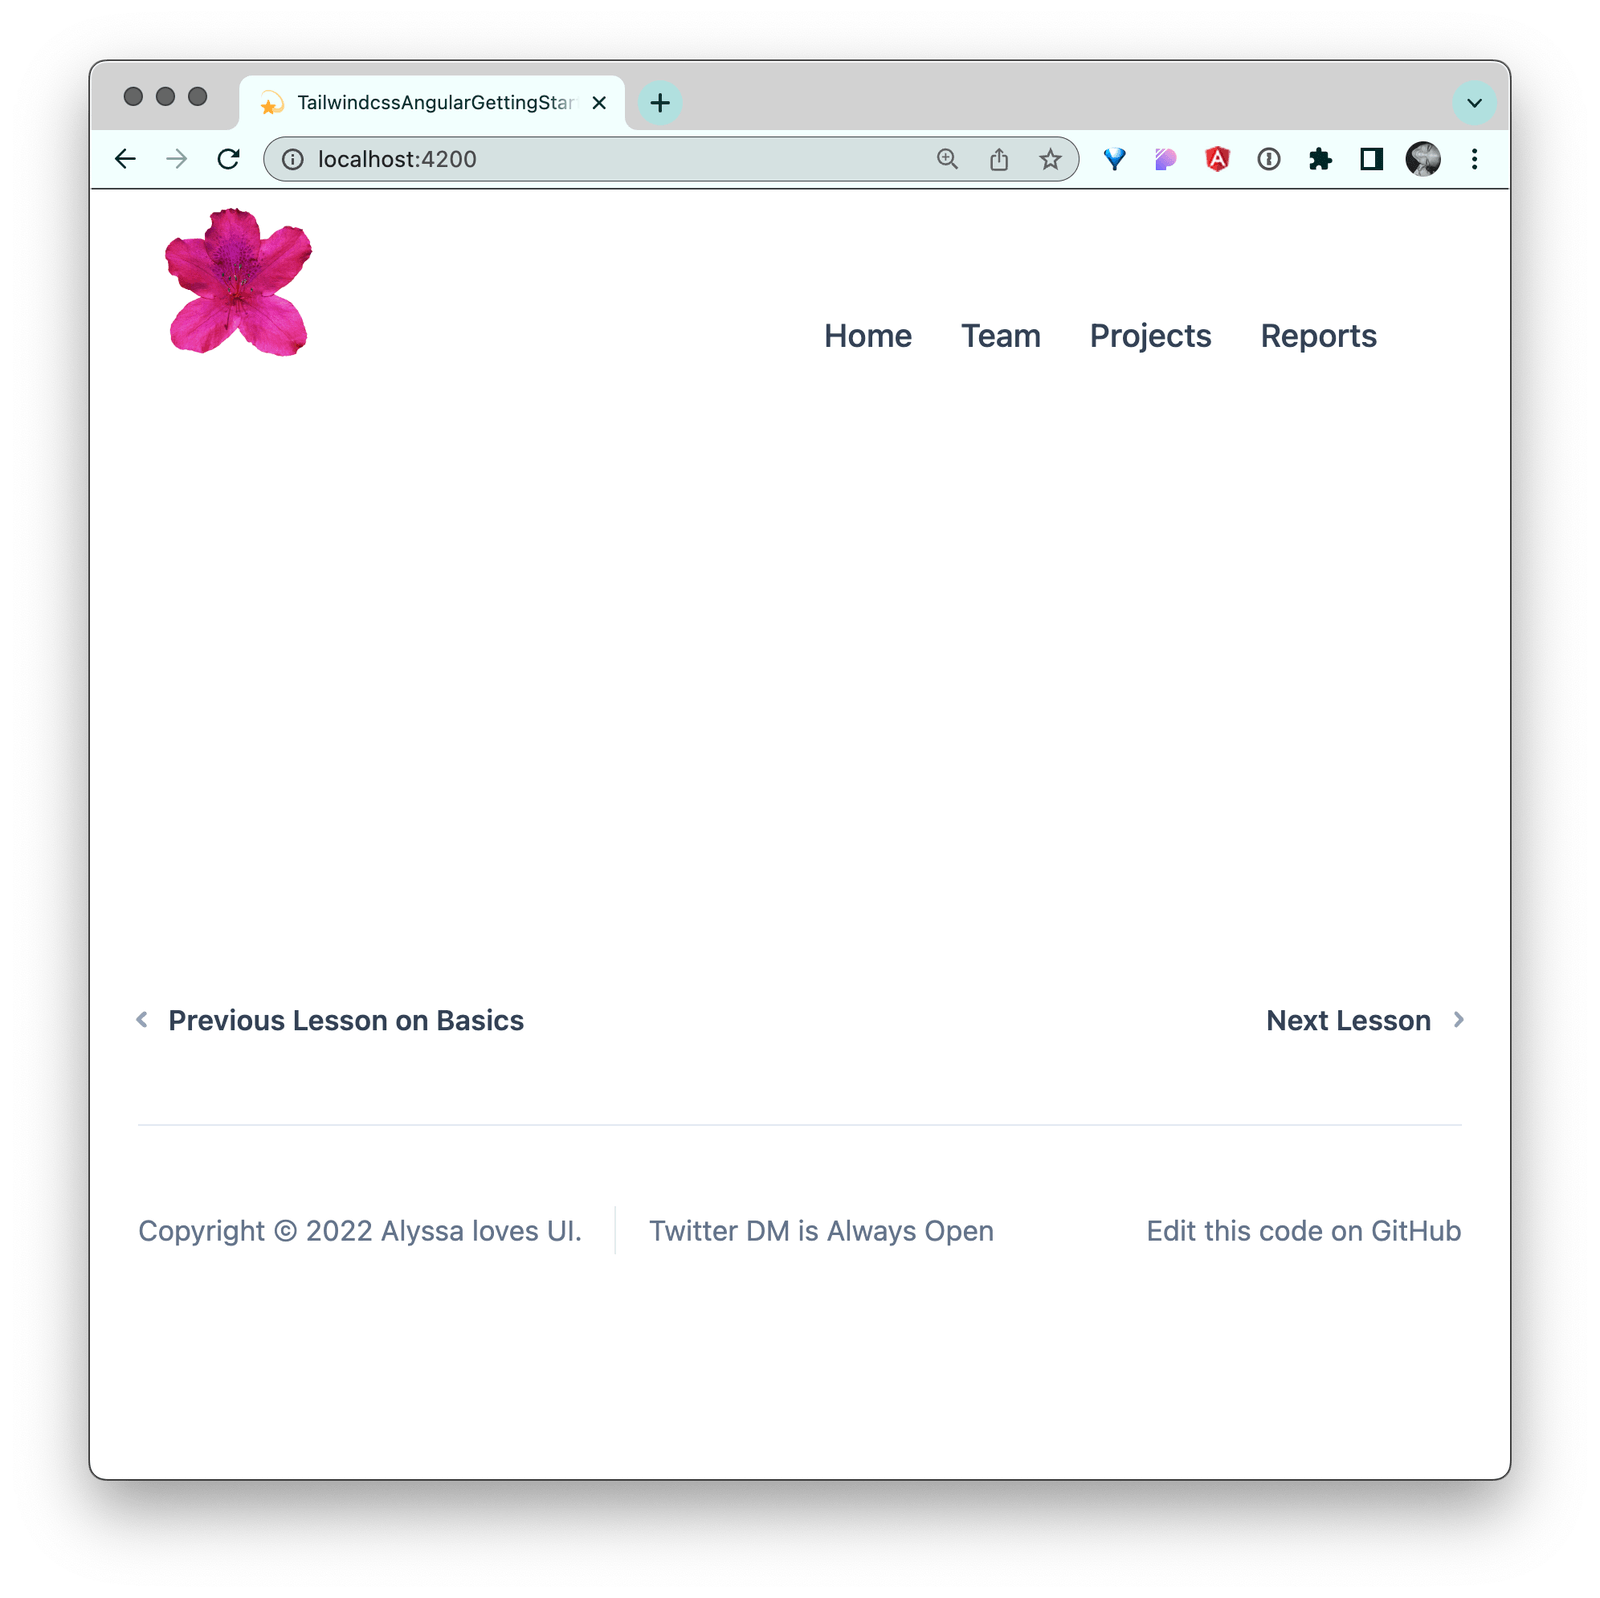 flexbox and grid layout with flower in the nav and forward and back buttons